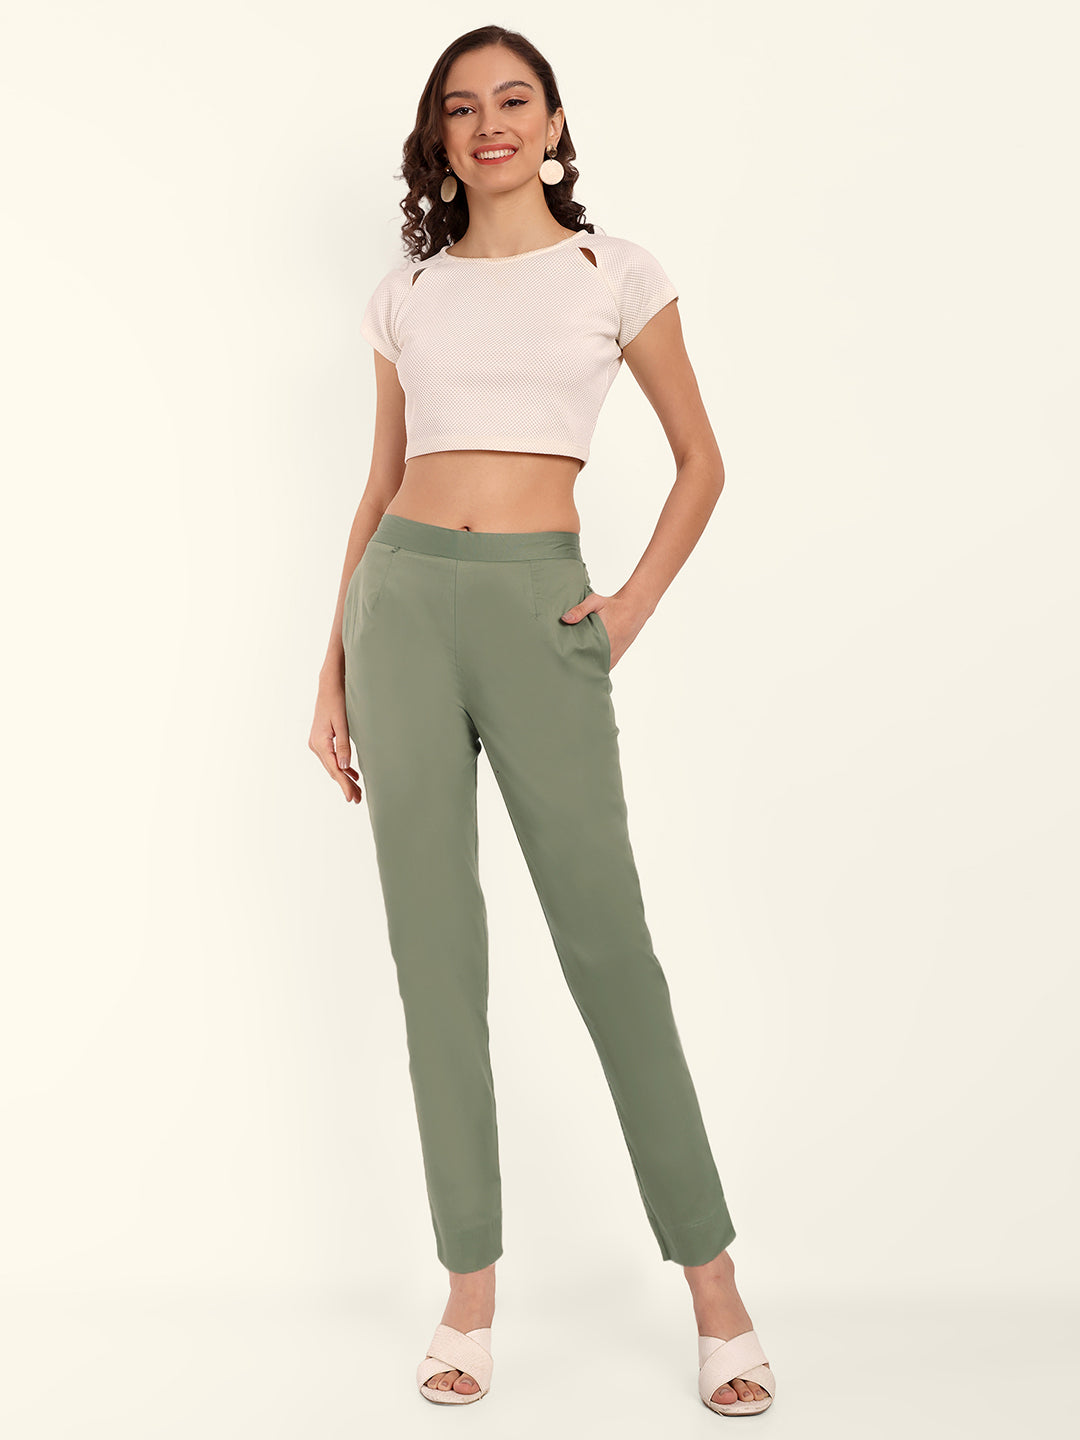 Pista Green Colour Straight Pant  The Pajama Factory